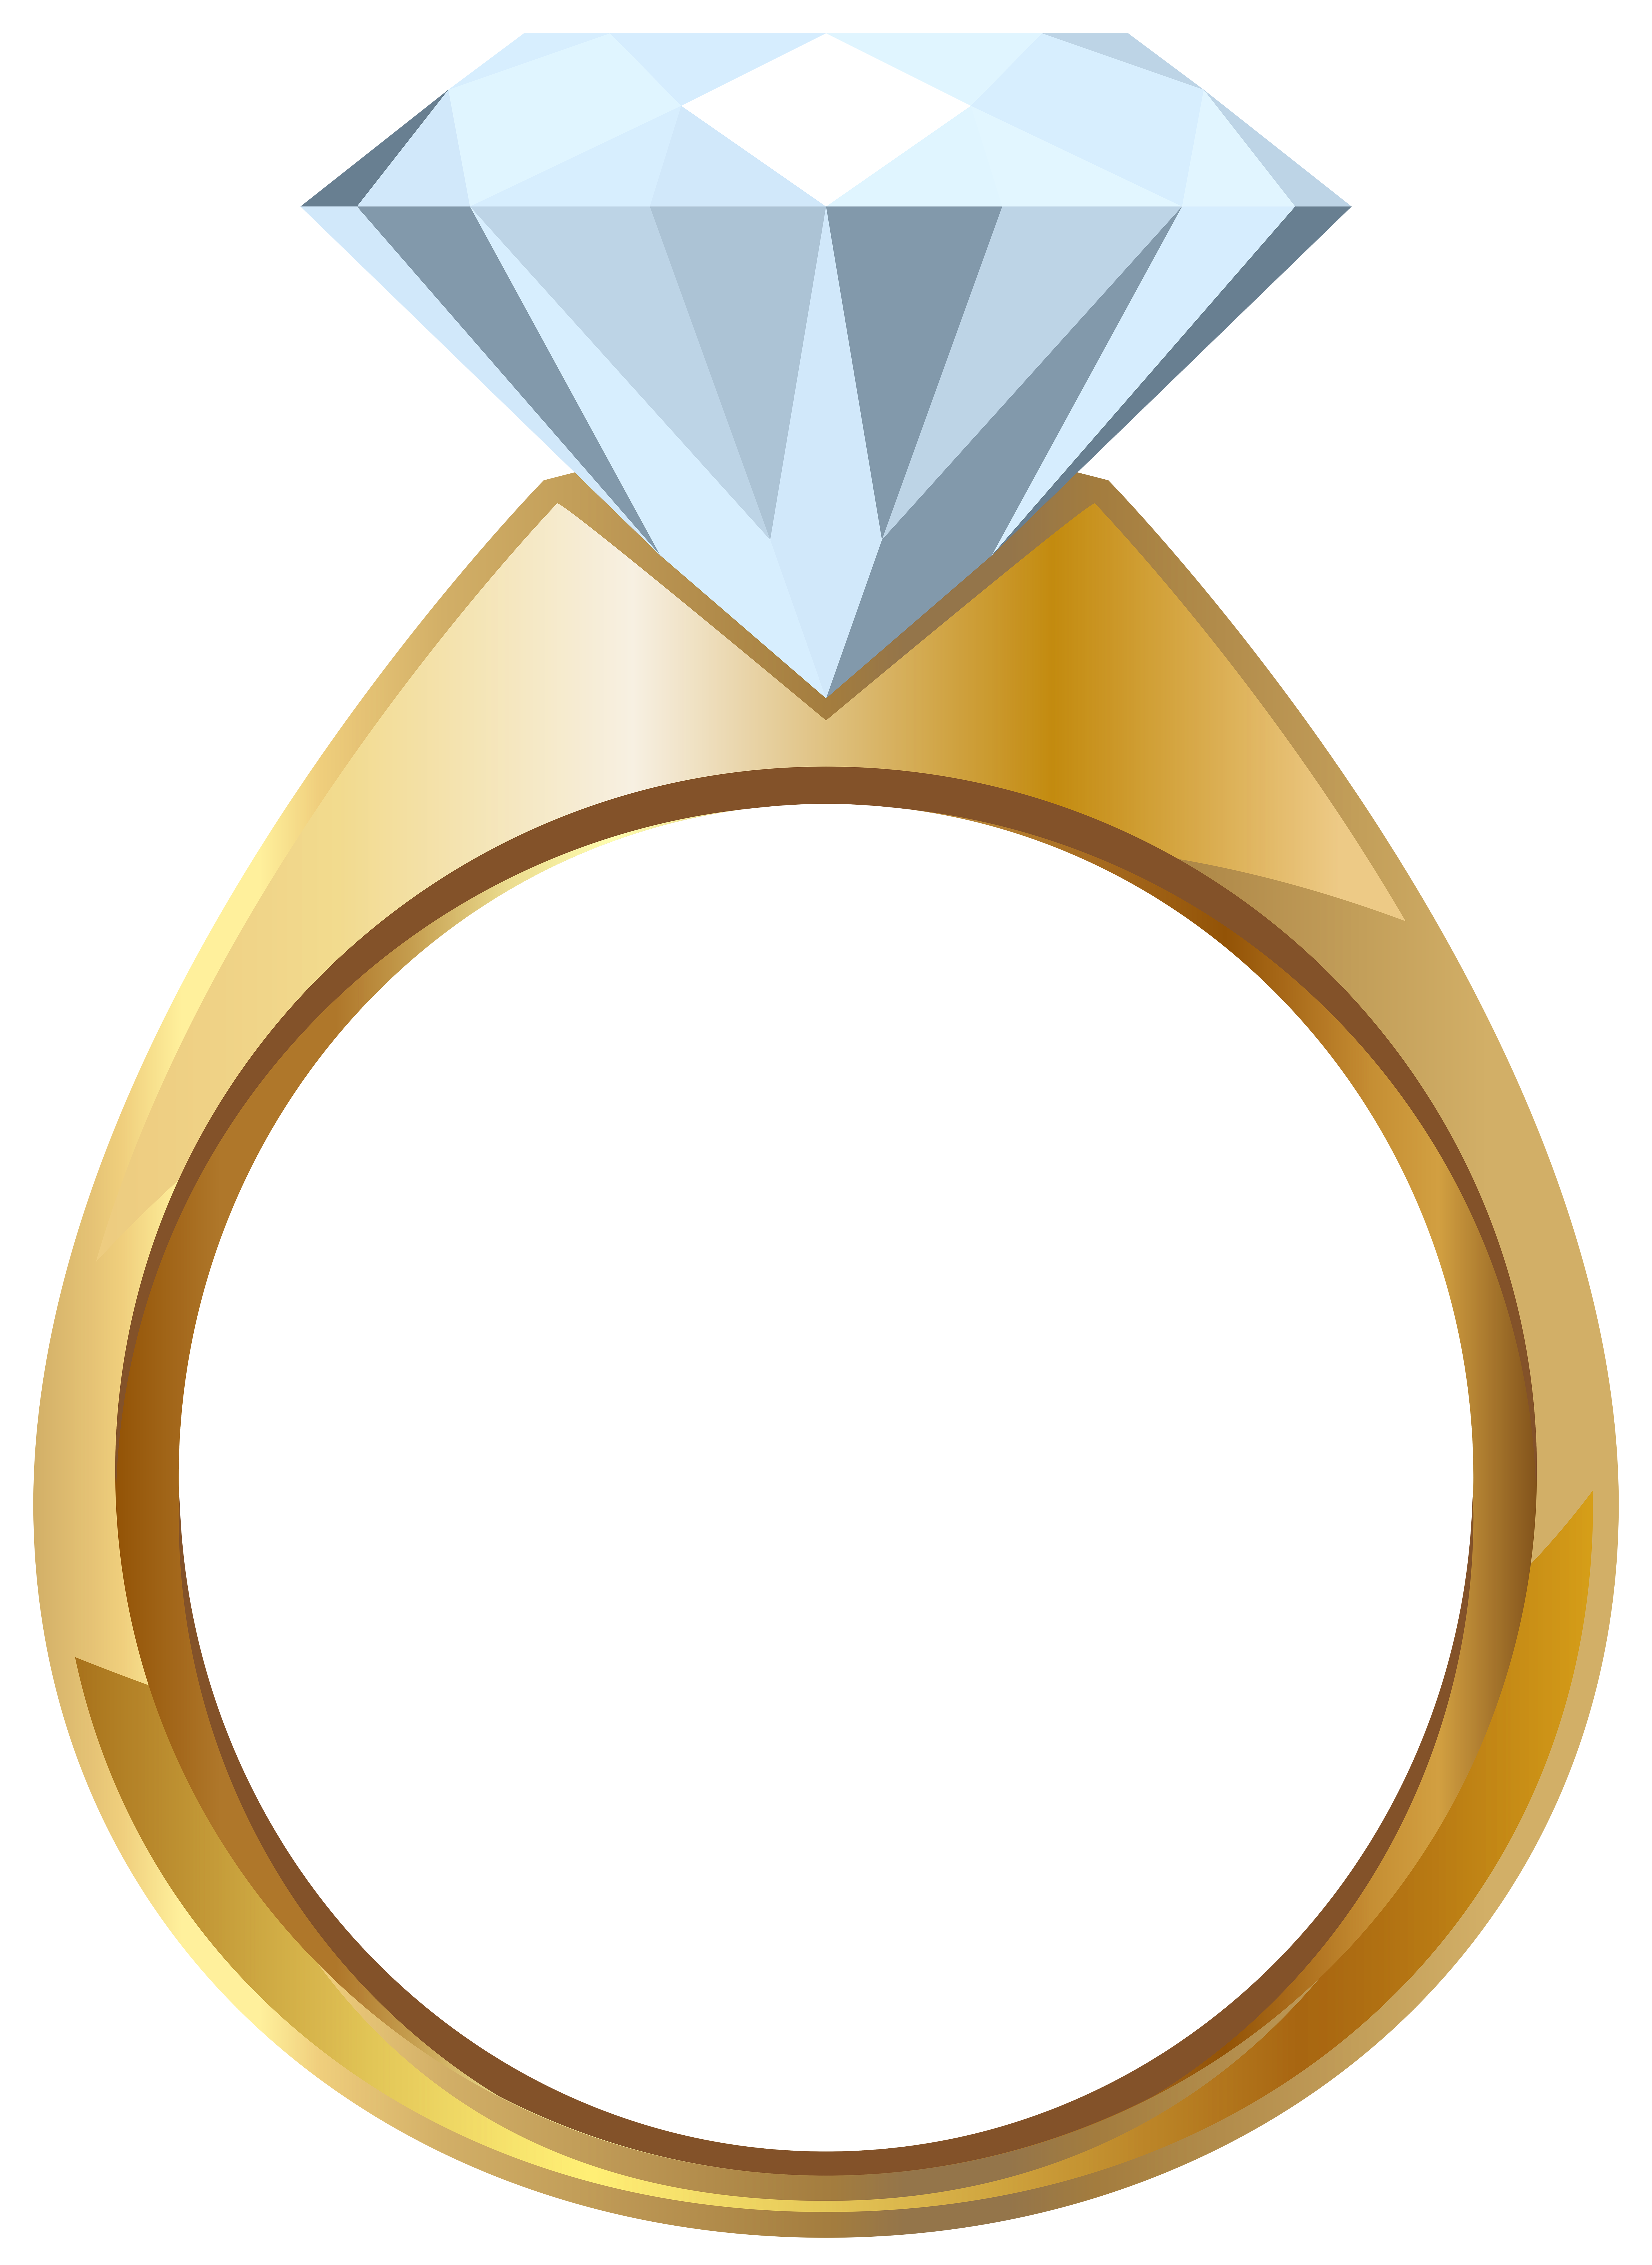 Clipart diamond free download on WebStockReview